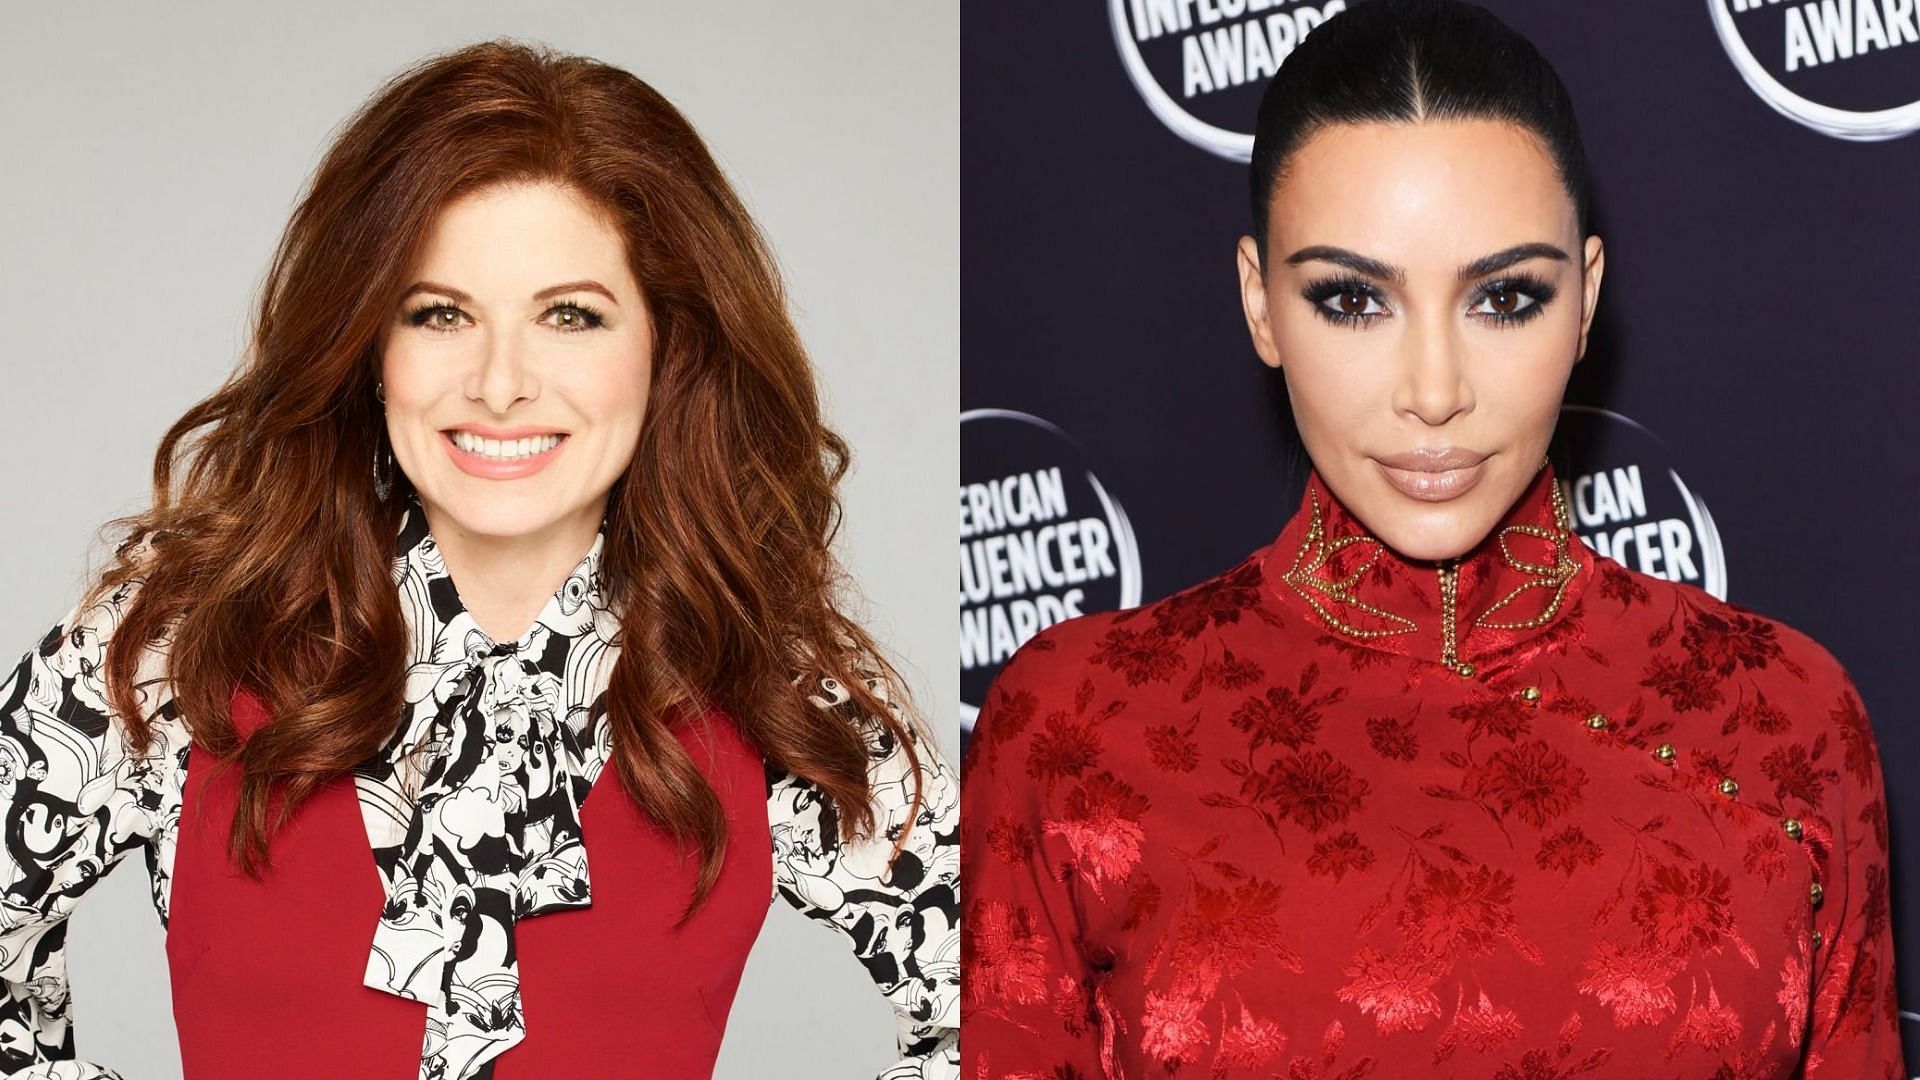 Kim Kardashian clapped back at Debra Messing for her past comments on the former&#039;s SNL hosting duties (Image via Andrew Eccles/Getty Images and Presley Ann/Getty Images)